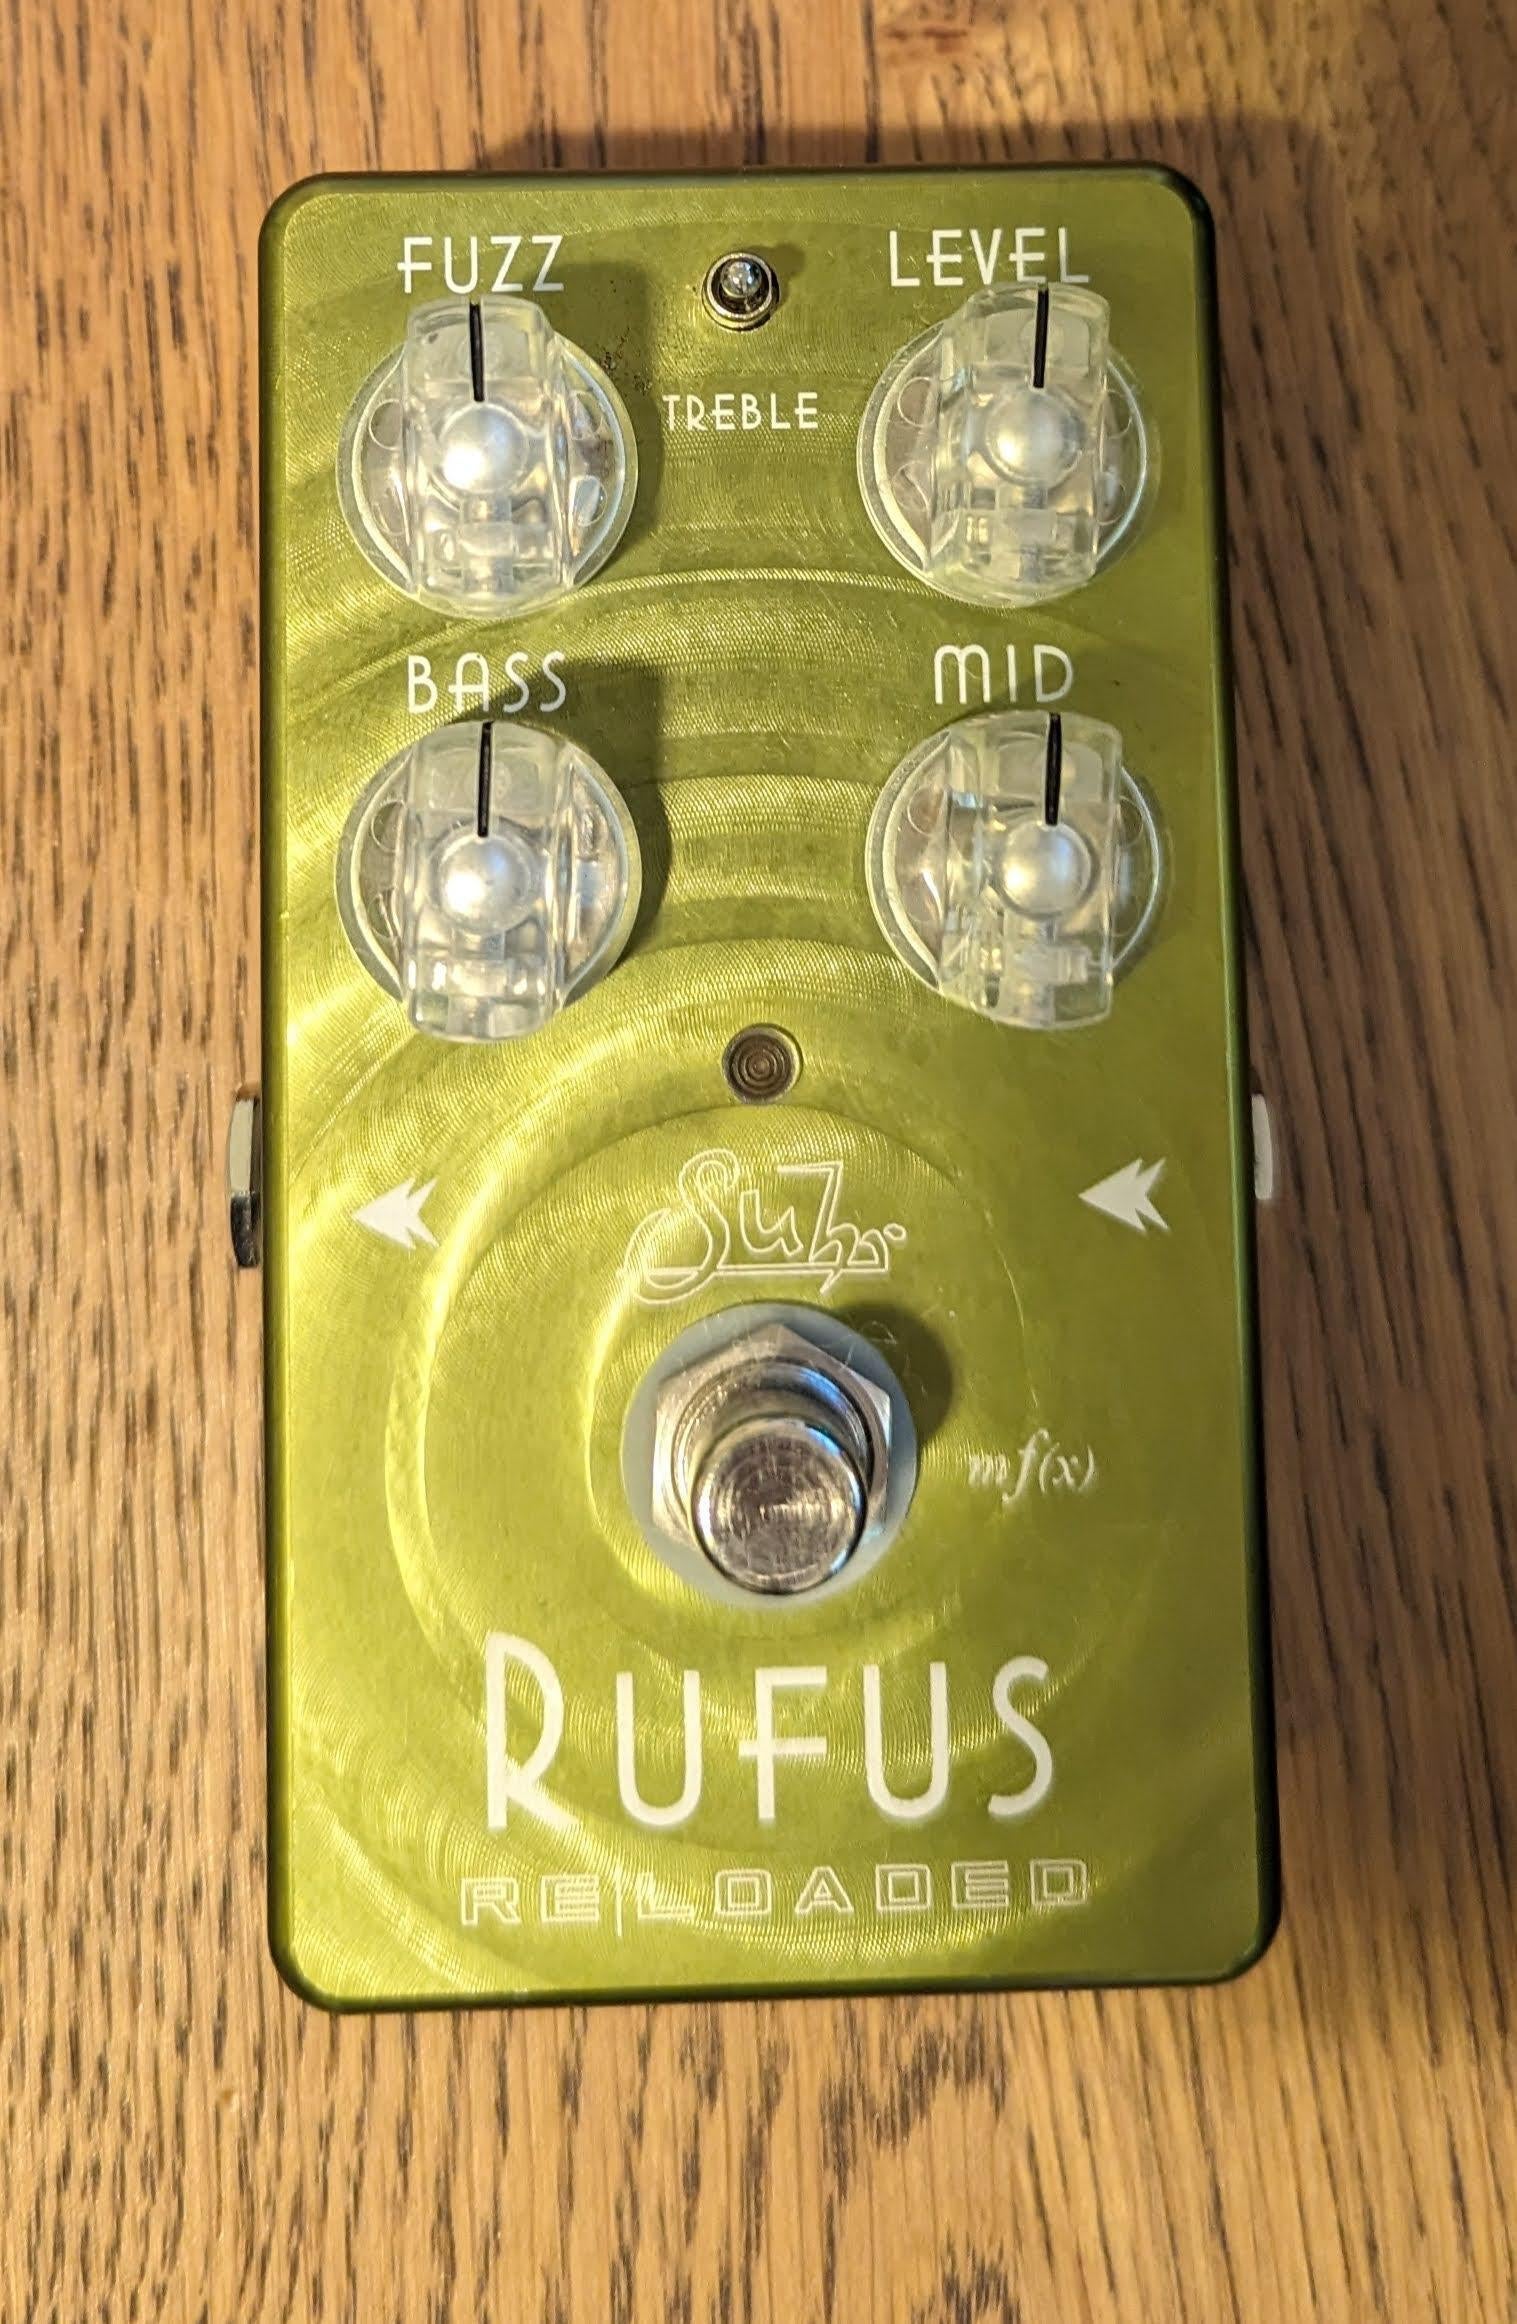 Used Suhr Rufus Reloaded Fuzz Pedal - Sweetwater's Gear Exchange